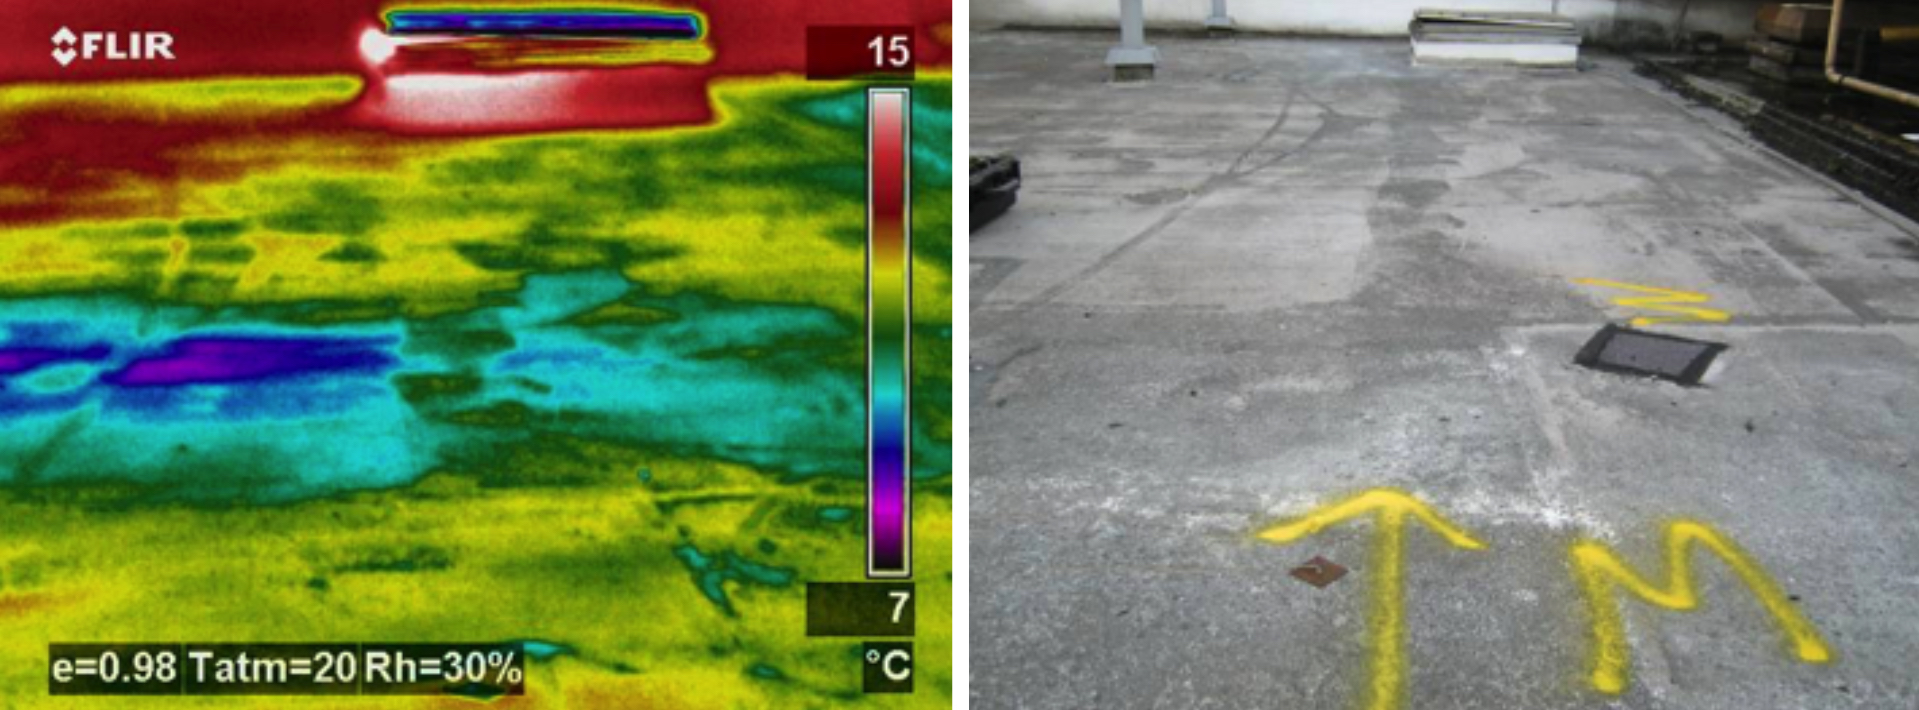 infrared imaging analysis for roof leak detection